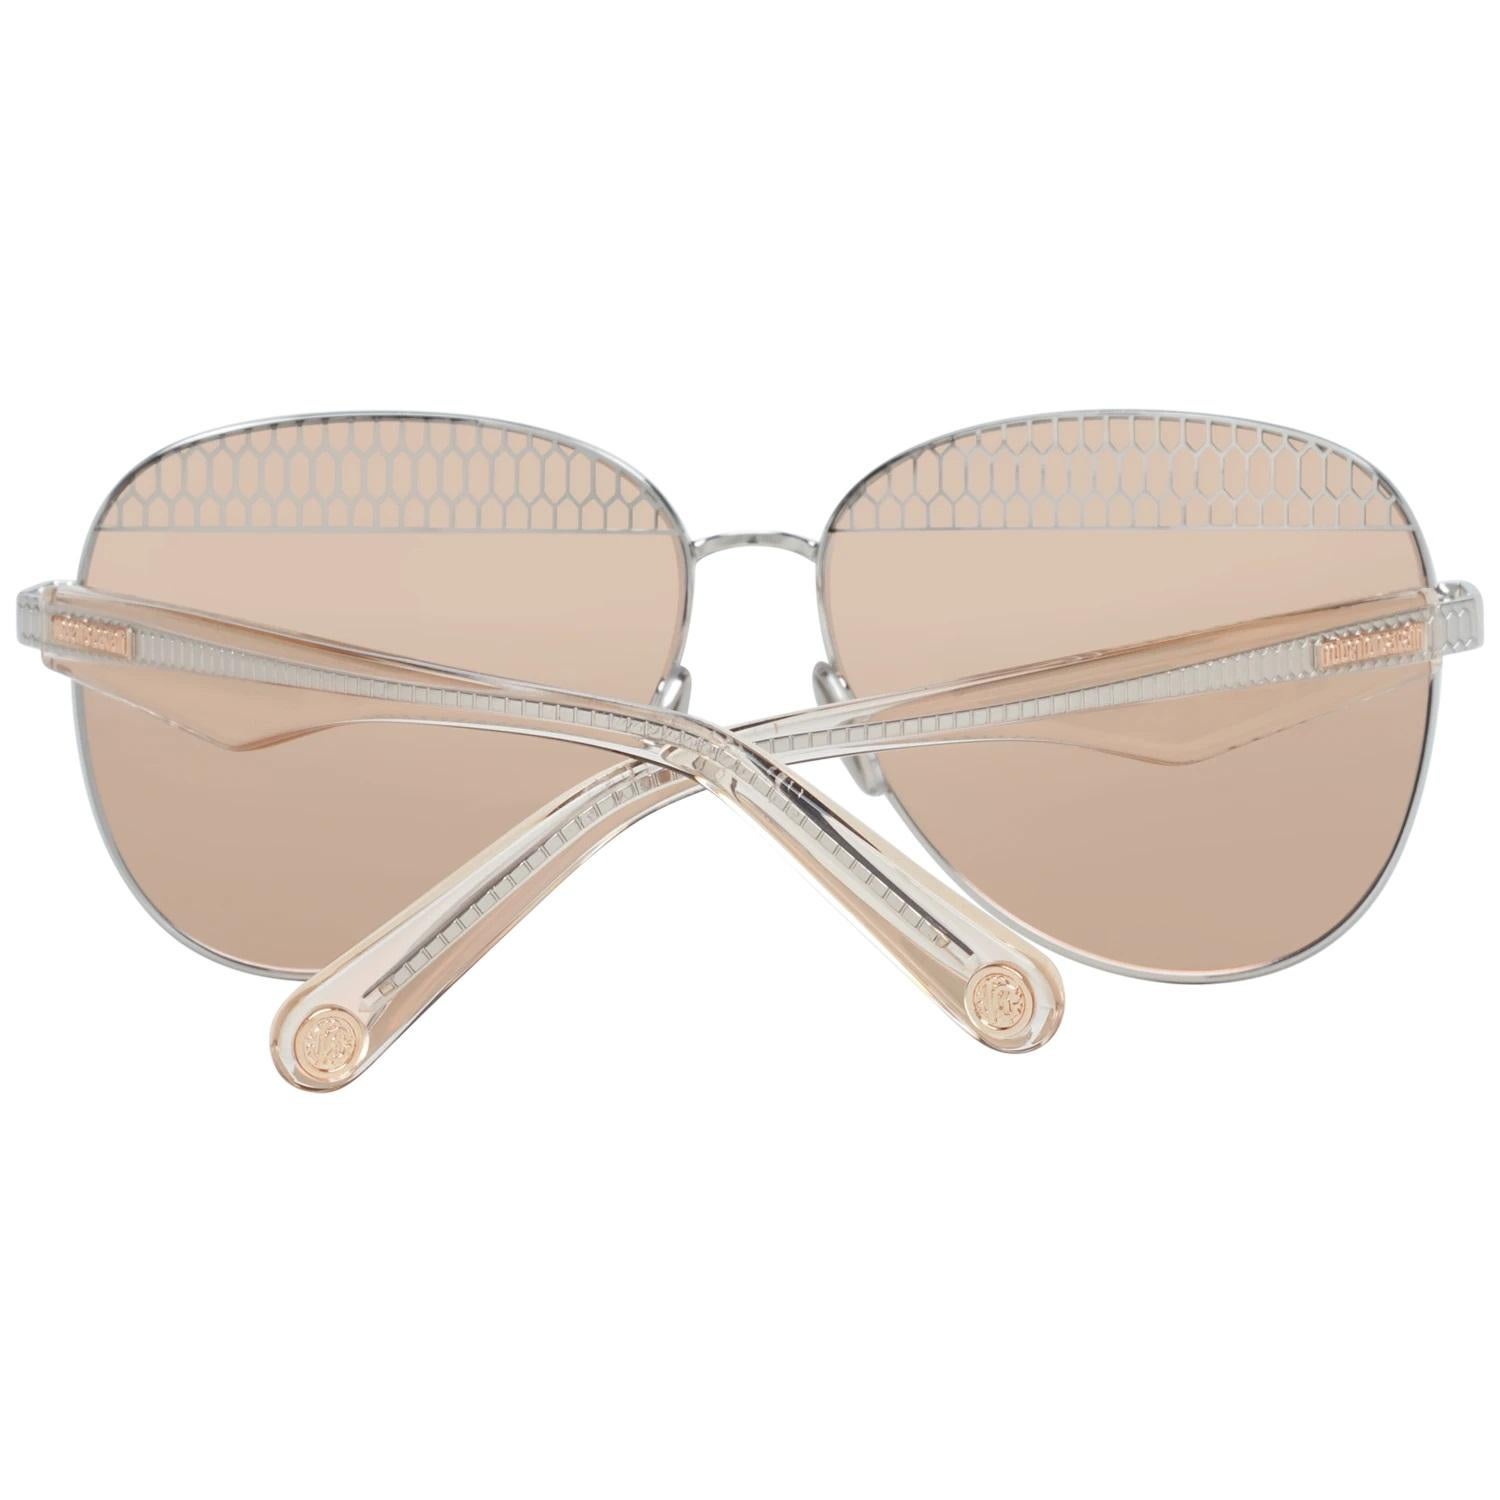 Details

MATERIAL: Metal

COLOR: Silver

MODEL: RC1139 6016U

GENDER: Women

COUNTRY OF MANUFACTURE: Italy

TYPE: Sunglasses

ORIGINAL CASE?: Yes

STYLE: Aviator

OCCASION: Casual

FEATURES: Lightweight

LENS COLOR: RosÃ© Gold

LENS TECHNOLOGY: